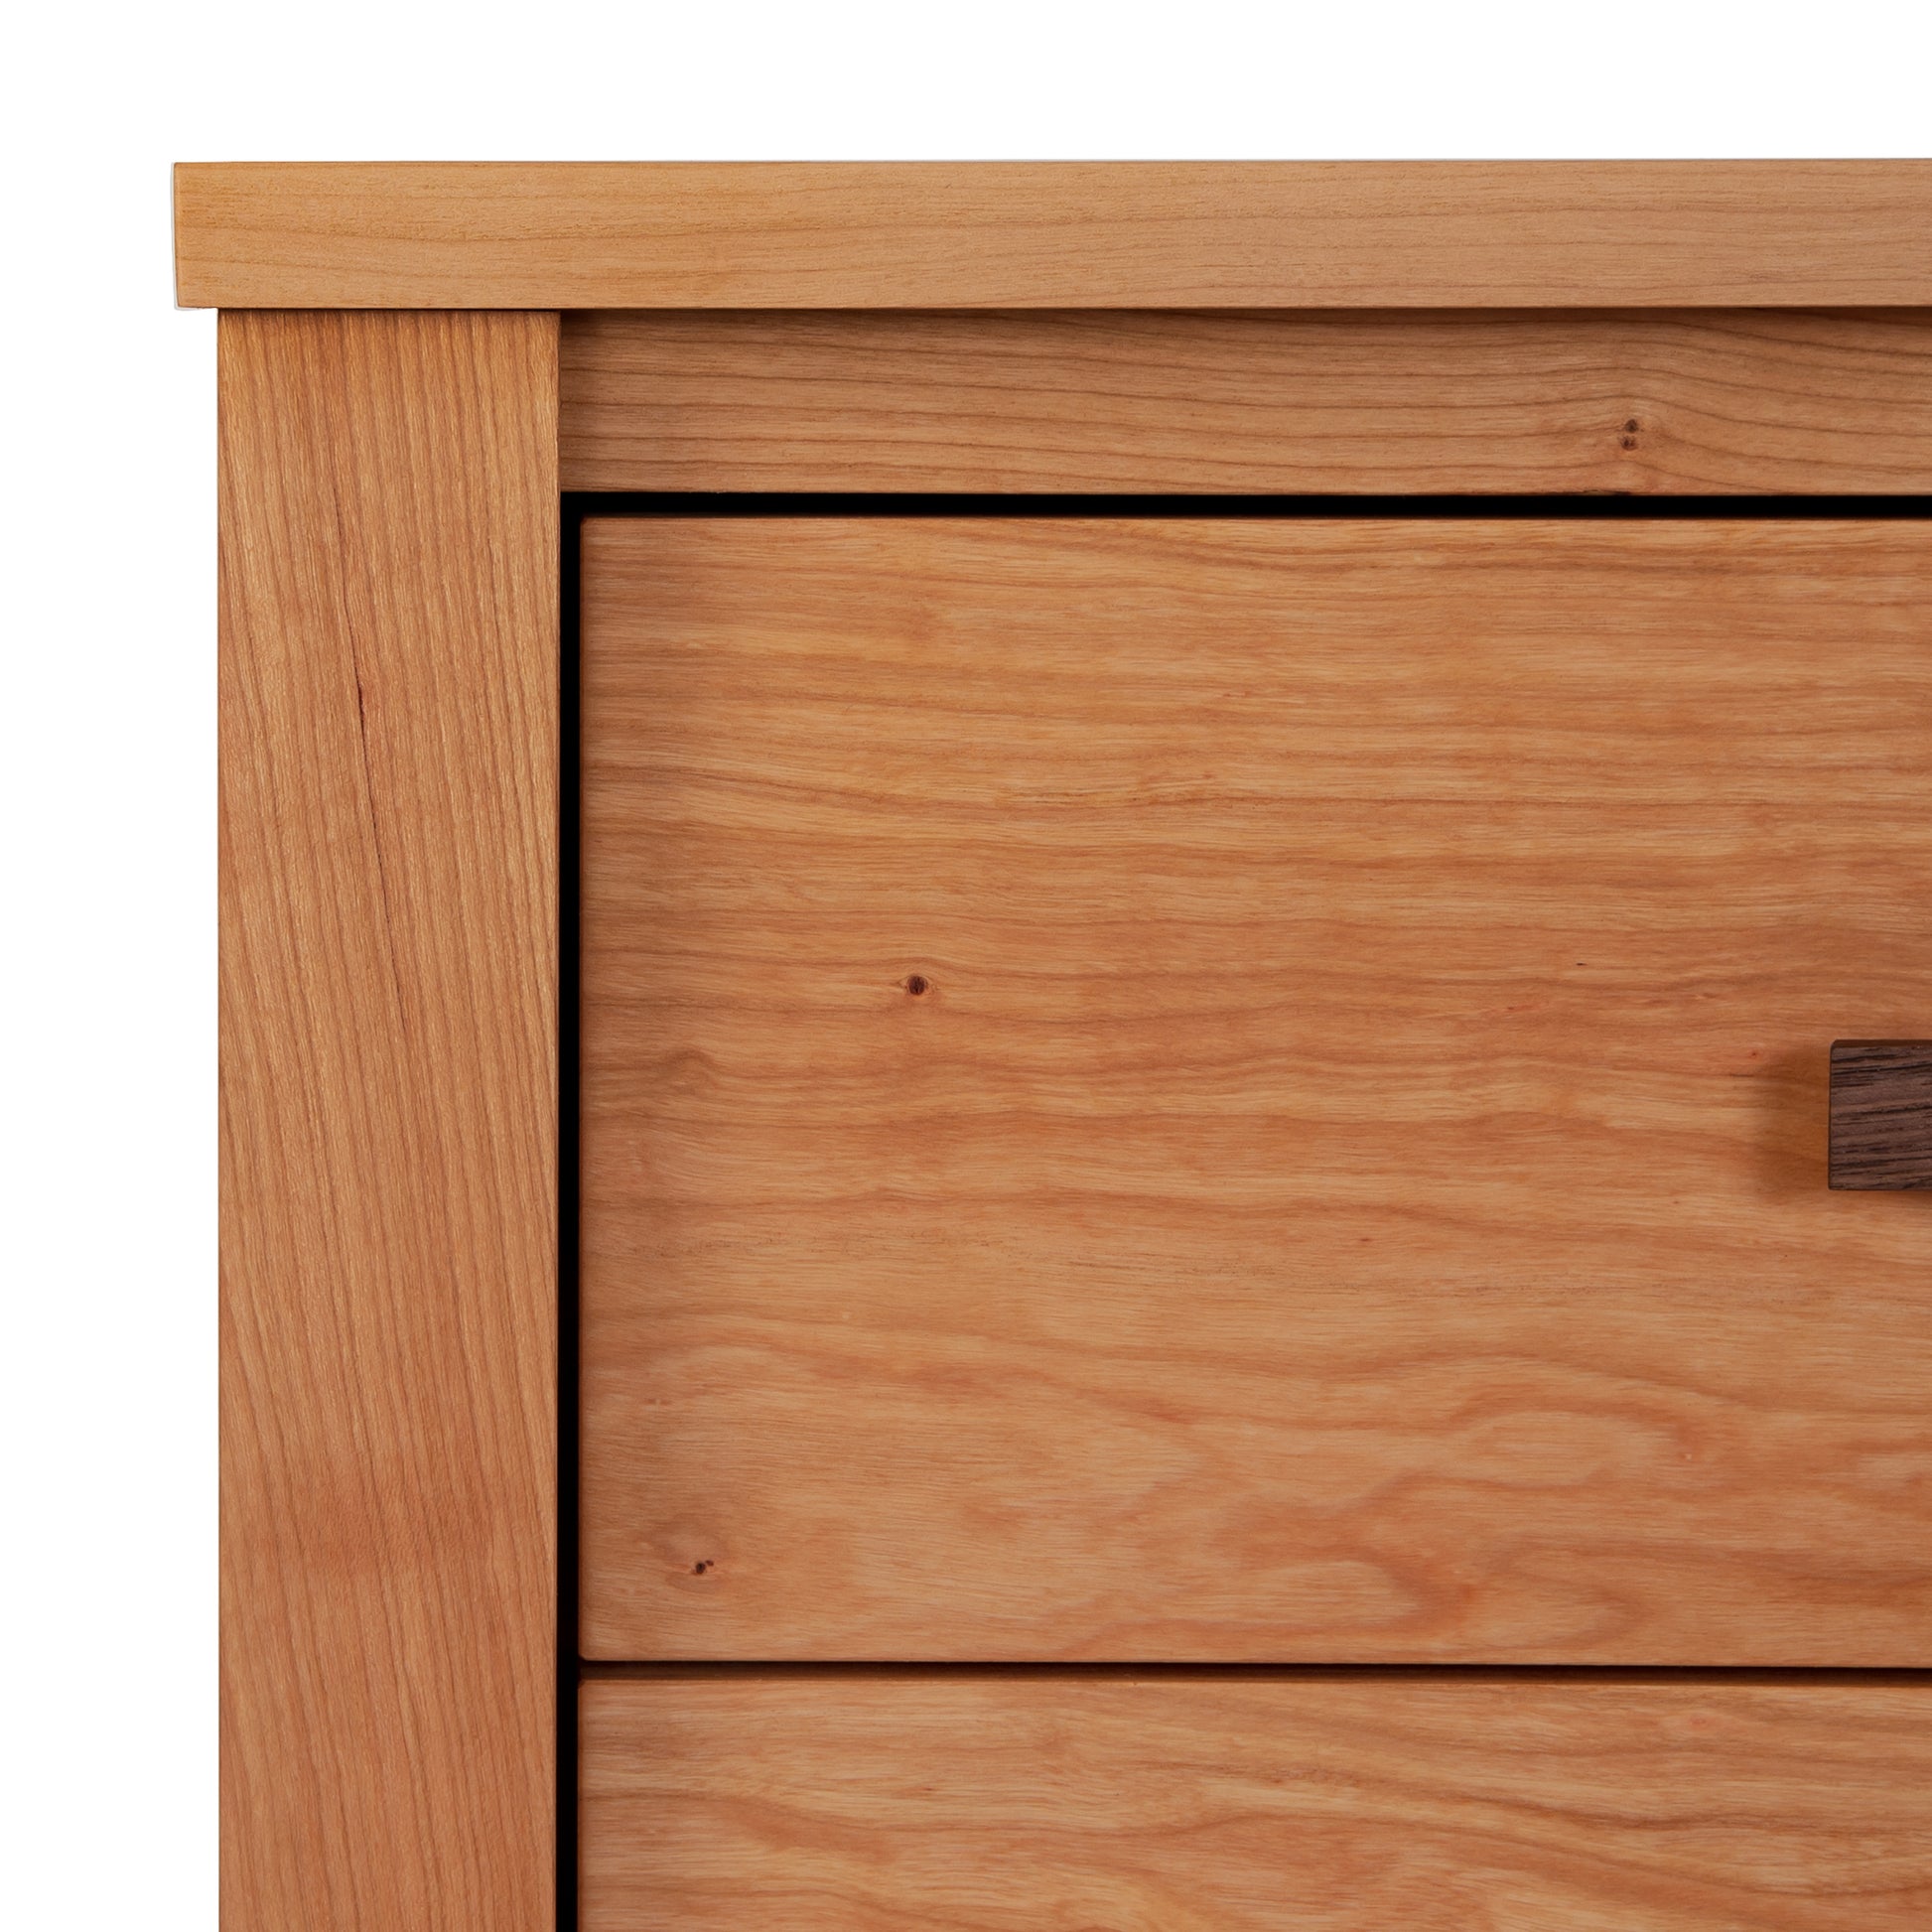 Close-up of a Maple Corner Woodworks Andover Modern 3-Drawer Nightstand showing part of the frame and a drawer with a simple rectangular handle, highlighting the wood's natural grain.